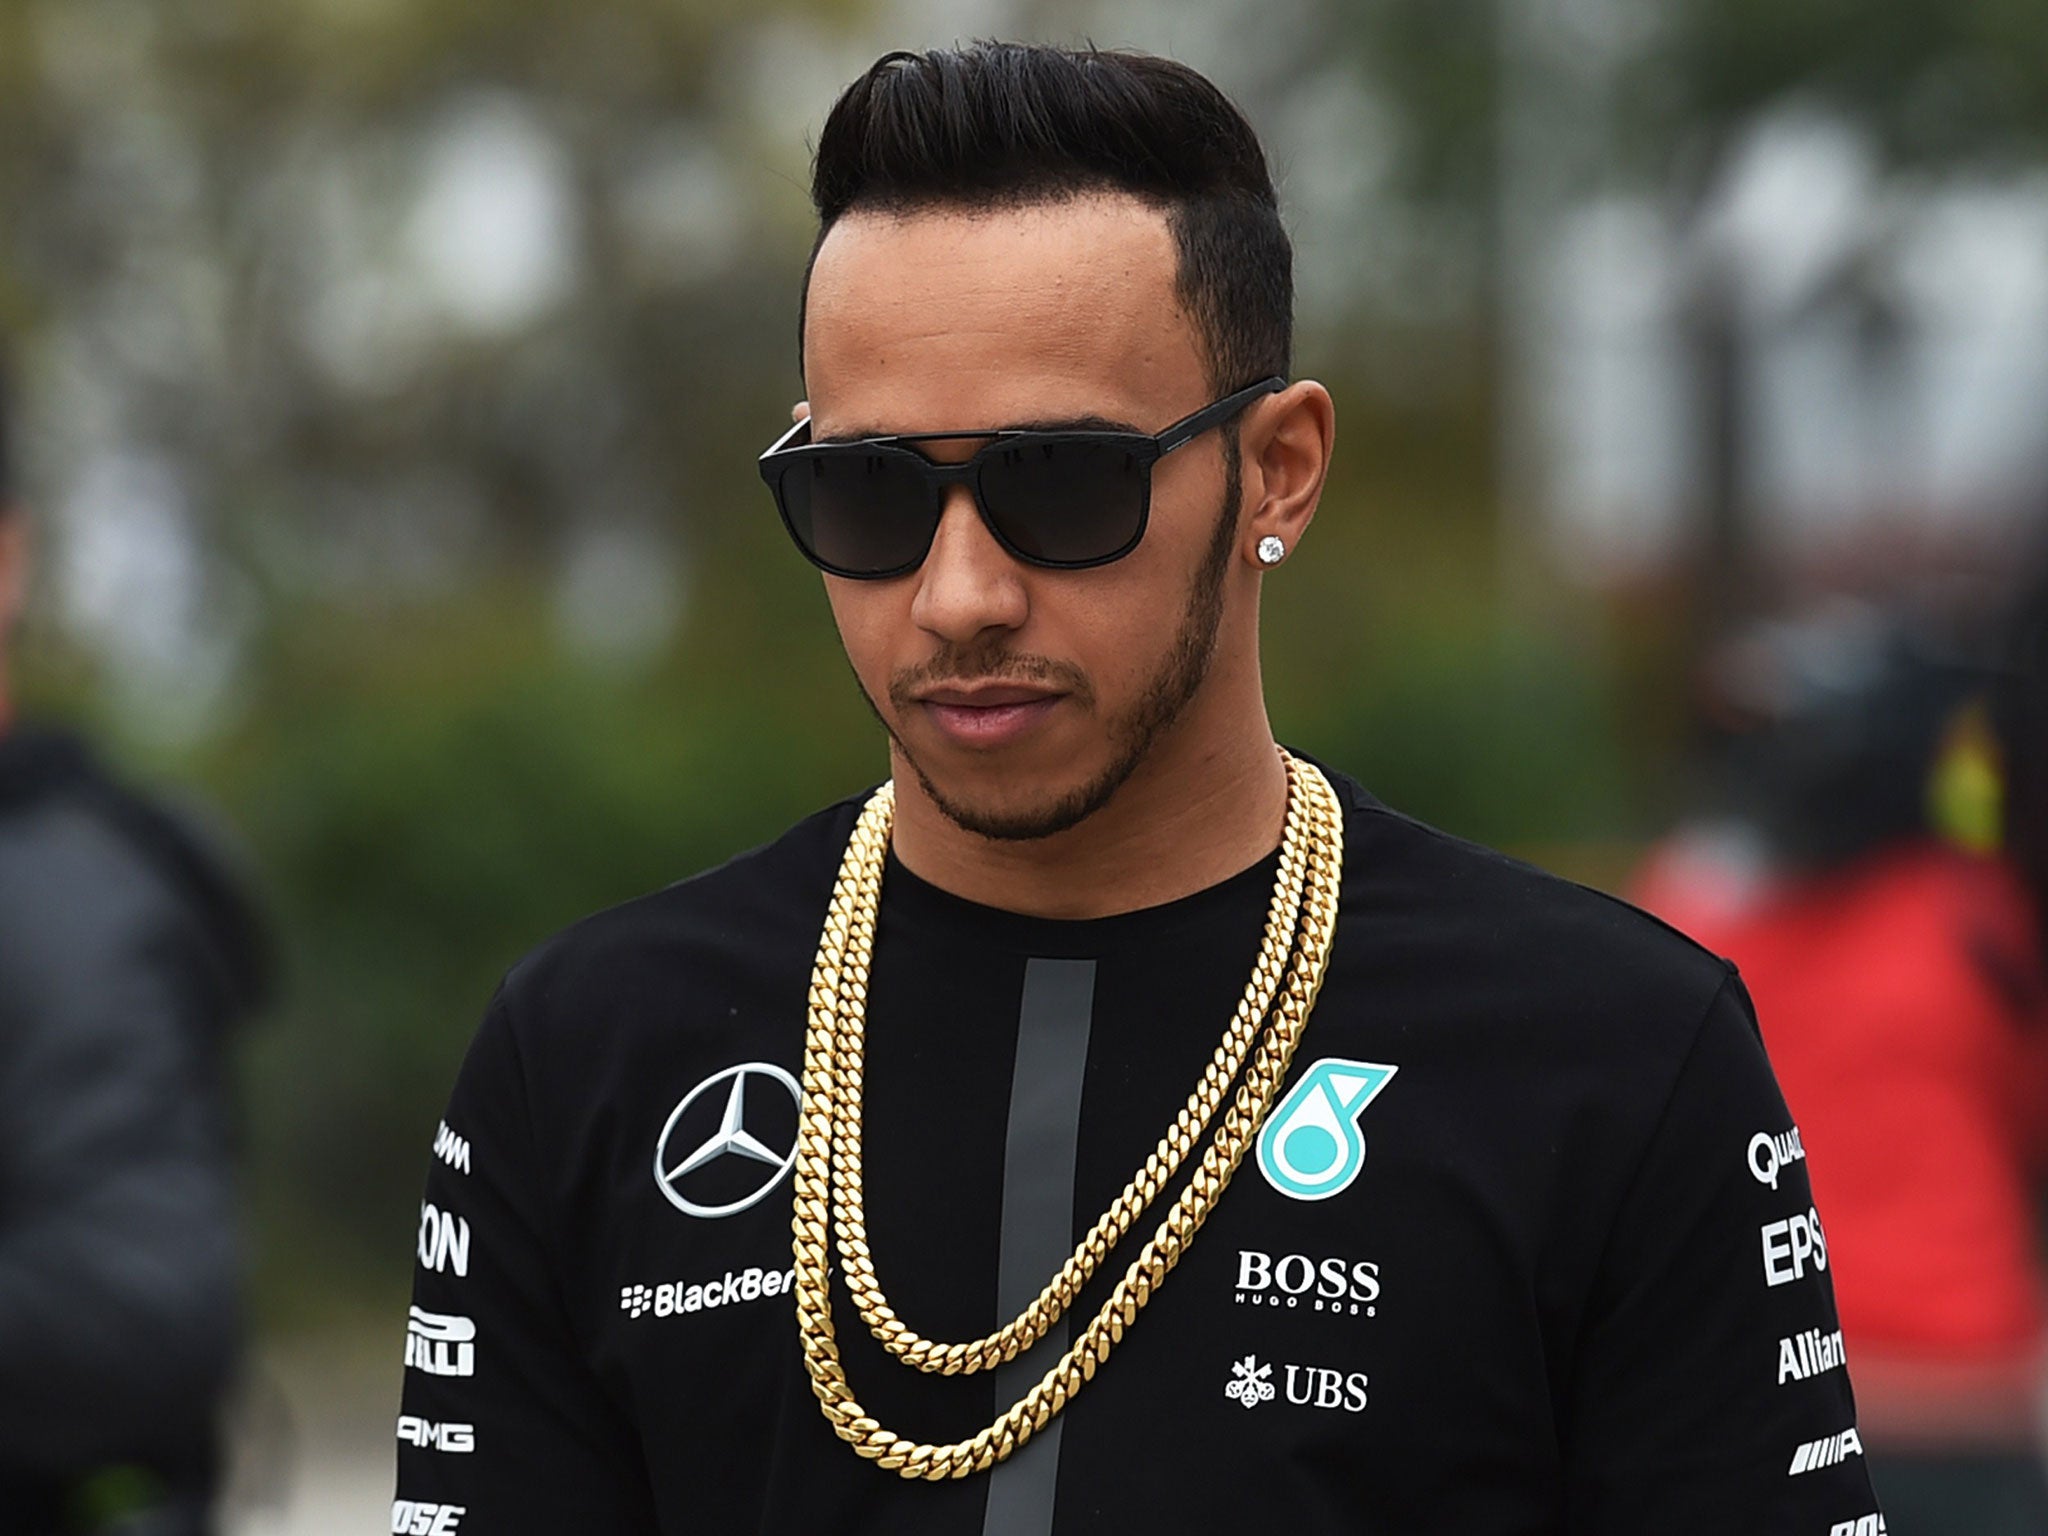 Lewis Hamilton is in contract talks with Mercedes